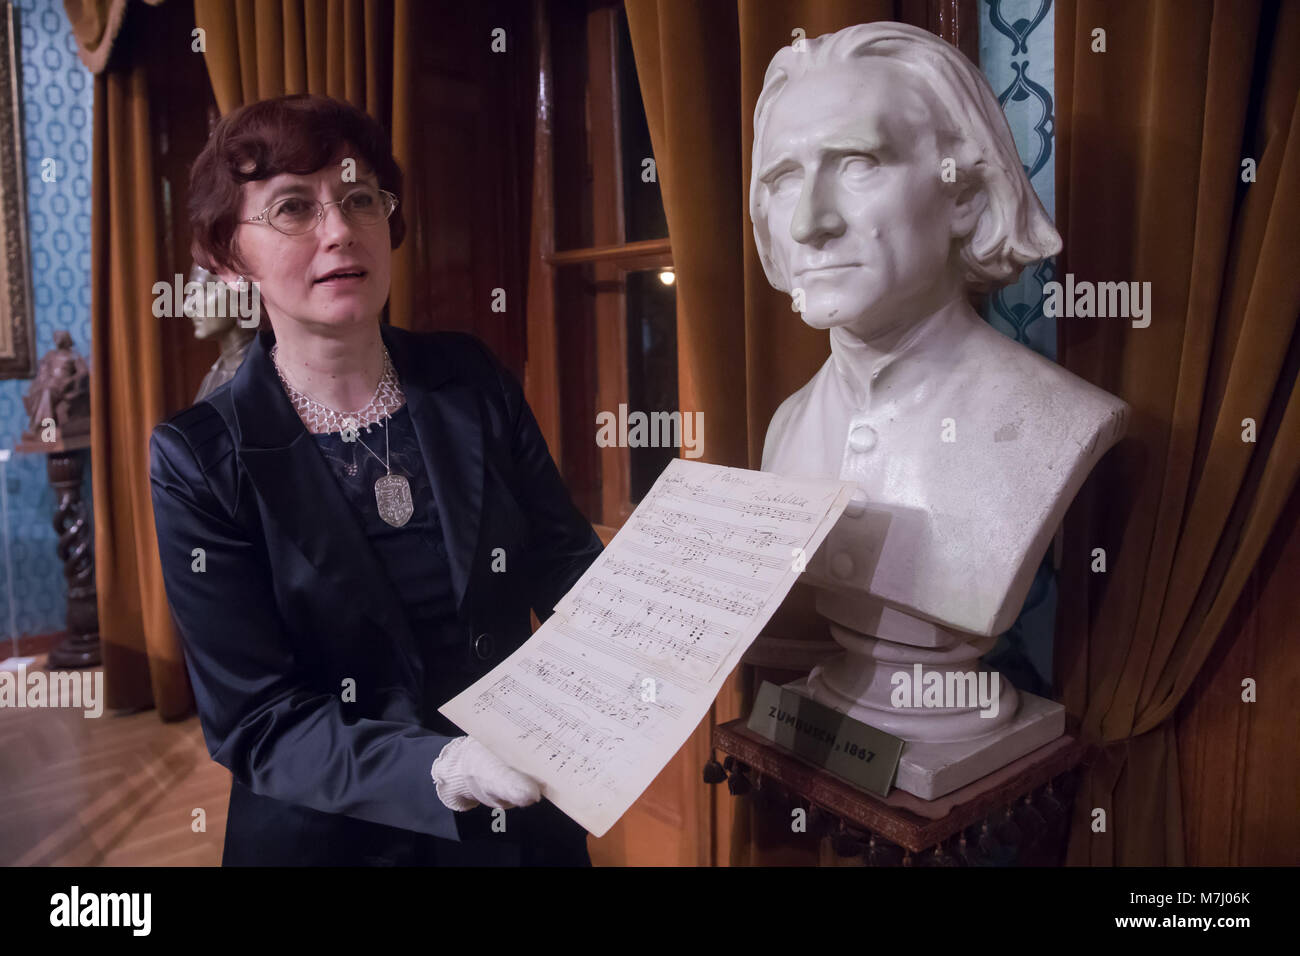 Budapest, Hungary. 10th Mar, 2018. Zsuzsanna Domokos, director of the Franz Liszt Memorial Museum and Research Center, holds famous Hungarian composer Franz Liszt's manuscript which is previously thought lost in the museum in Budapest, Hungary, on March 10, 2018. The manuscripts believed to be of famous Hungarian composer Franz Liszt were presented in the museum on Saturday in a solemn ceremony. Credit: Attila Volgyi/Xinhua/Alamy Live News Stock Photo